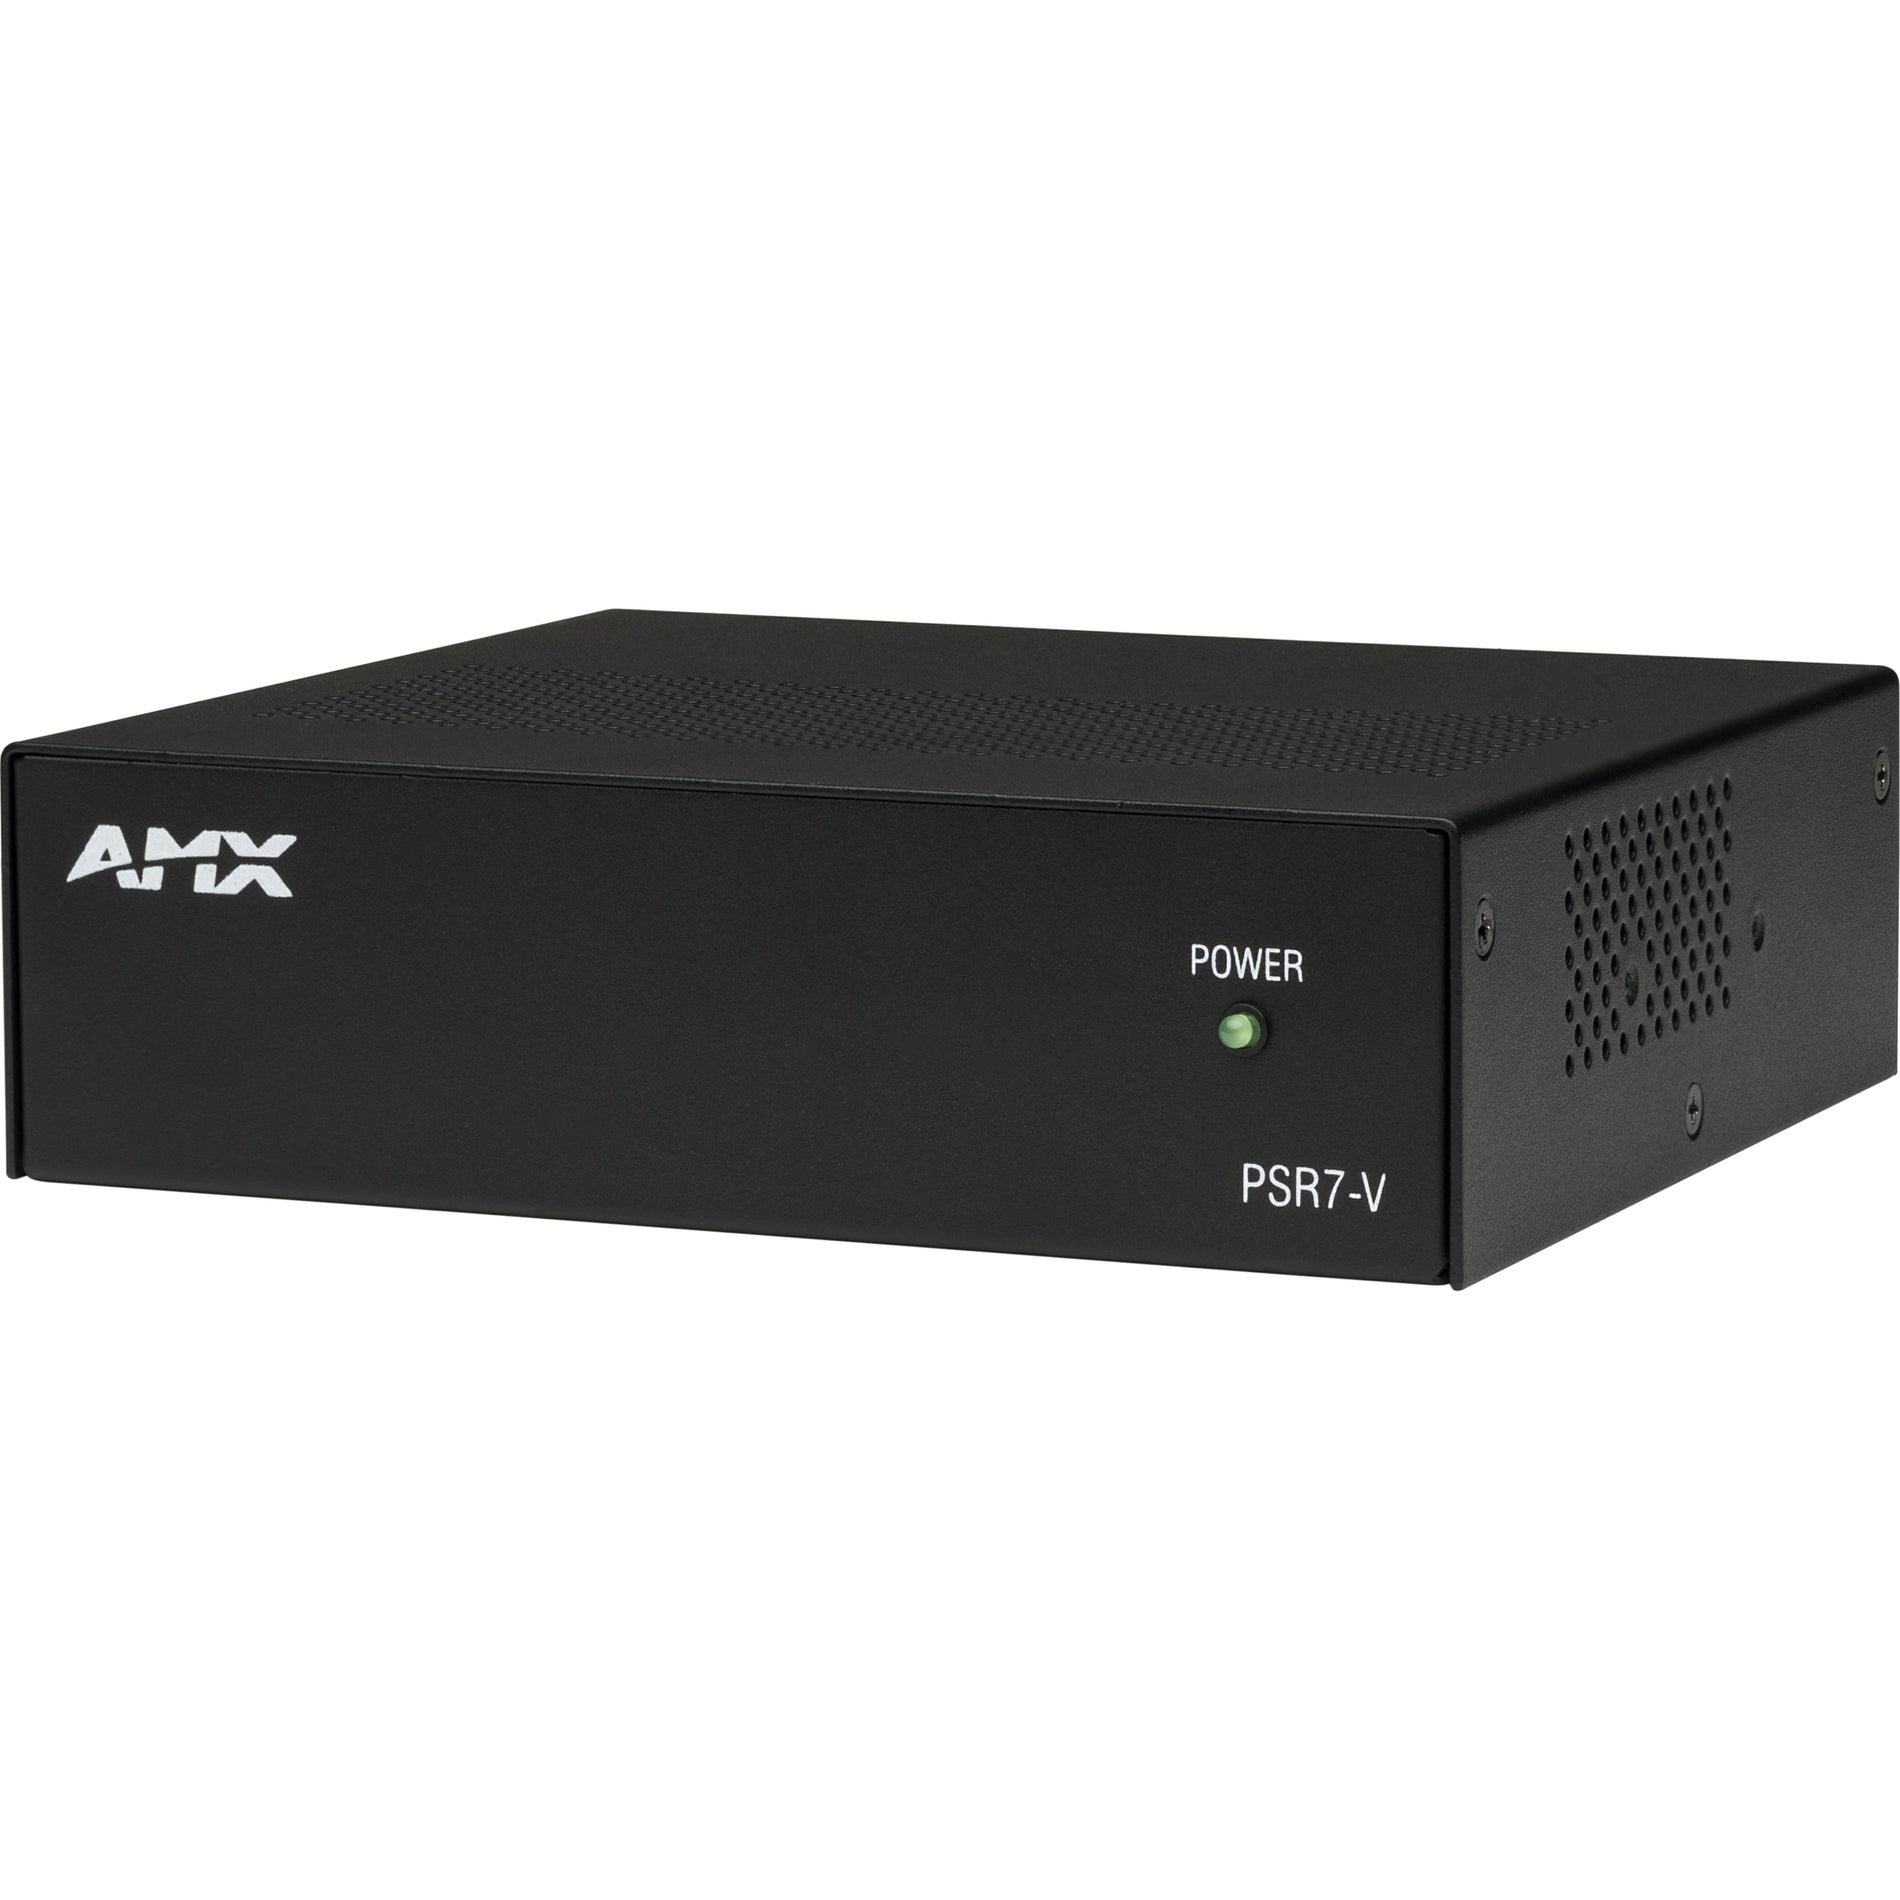 AMX FG423-49 PSR7-V Versatile Mount 5.5 Amp Power Supply, Compact and Reliable Power Solution